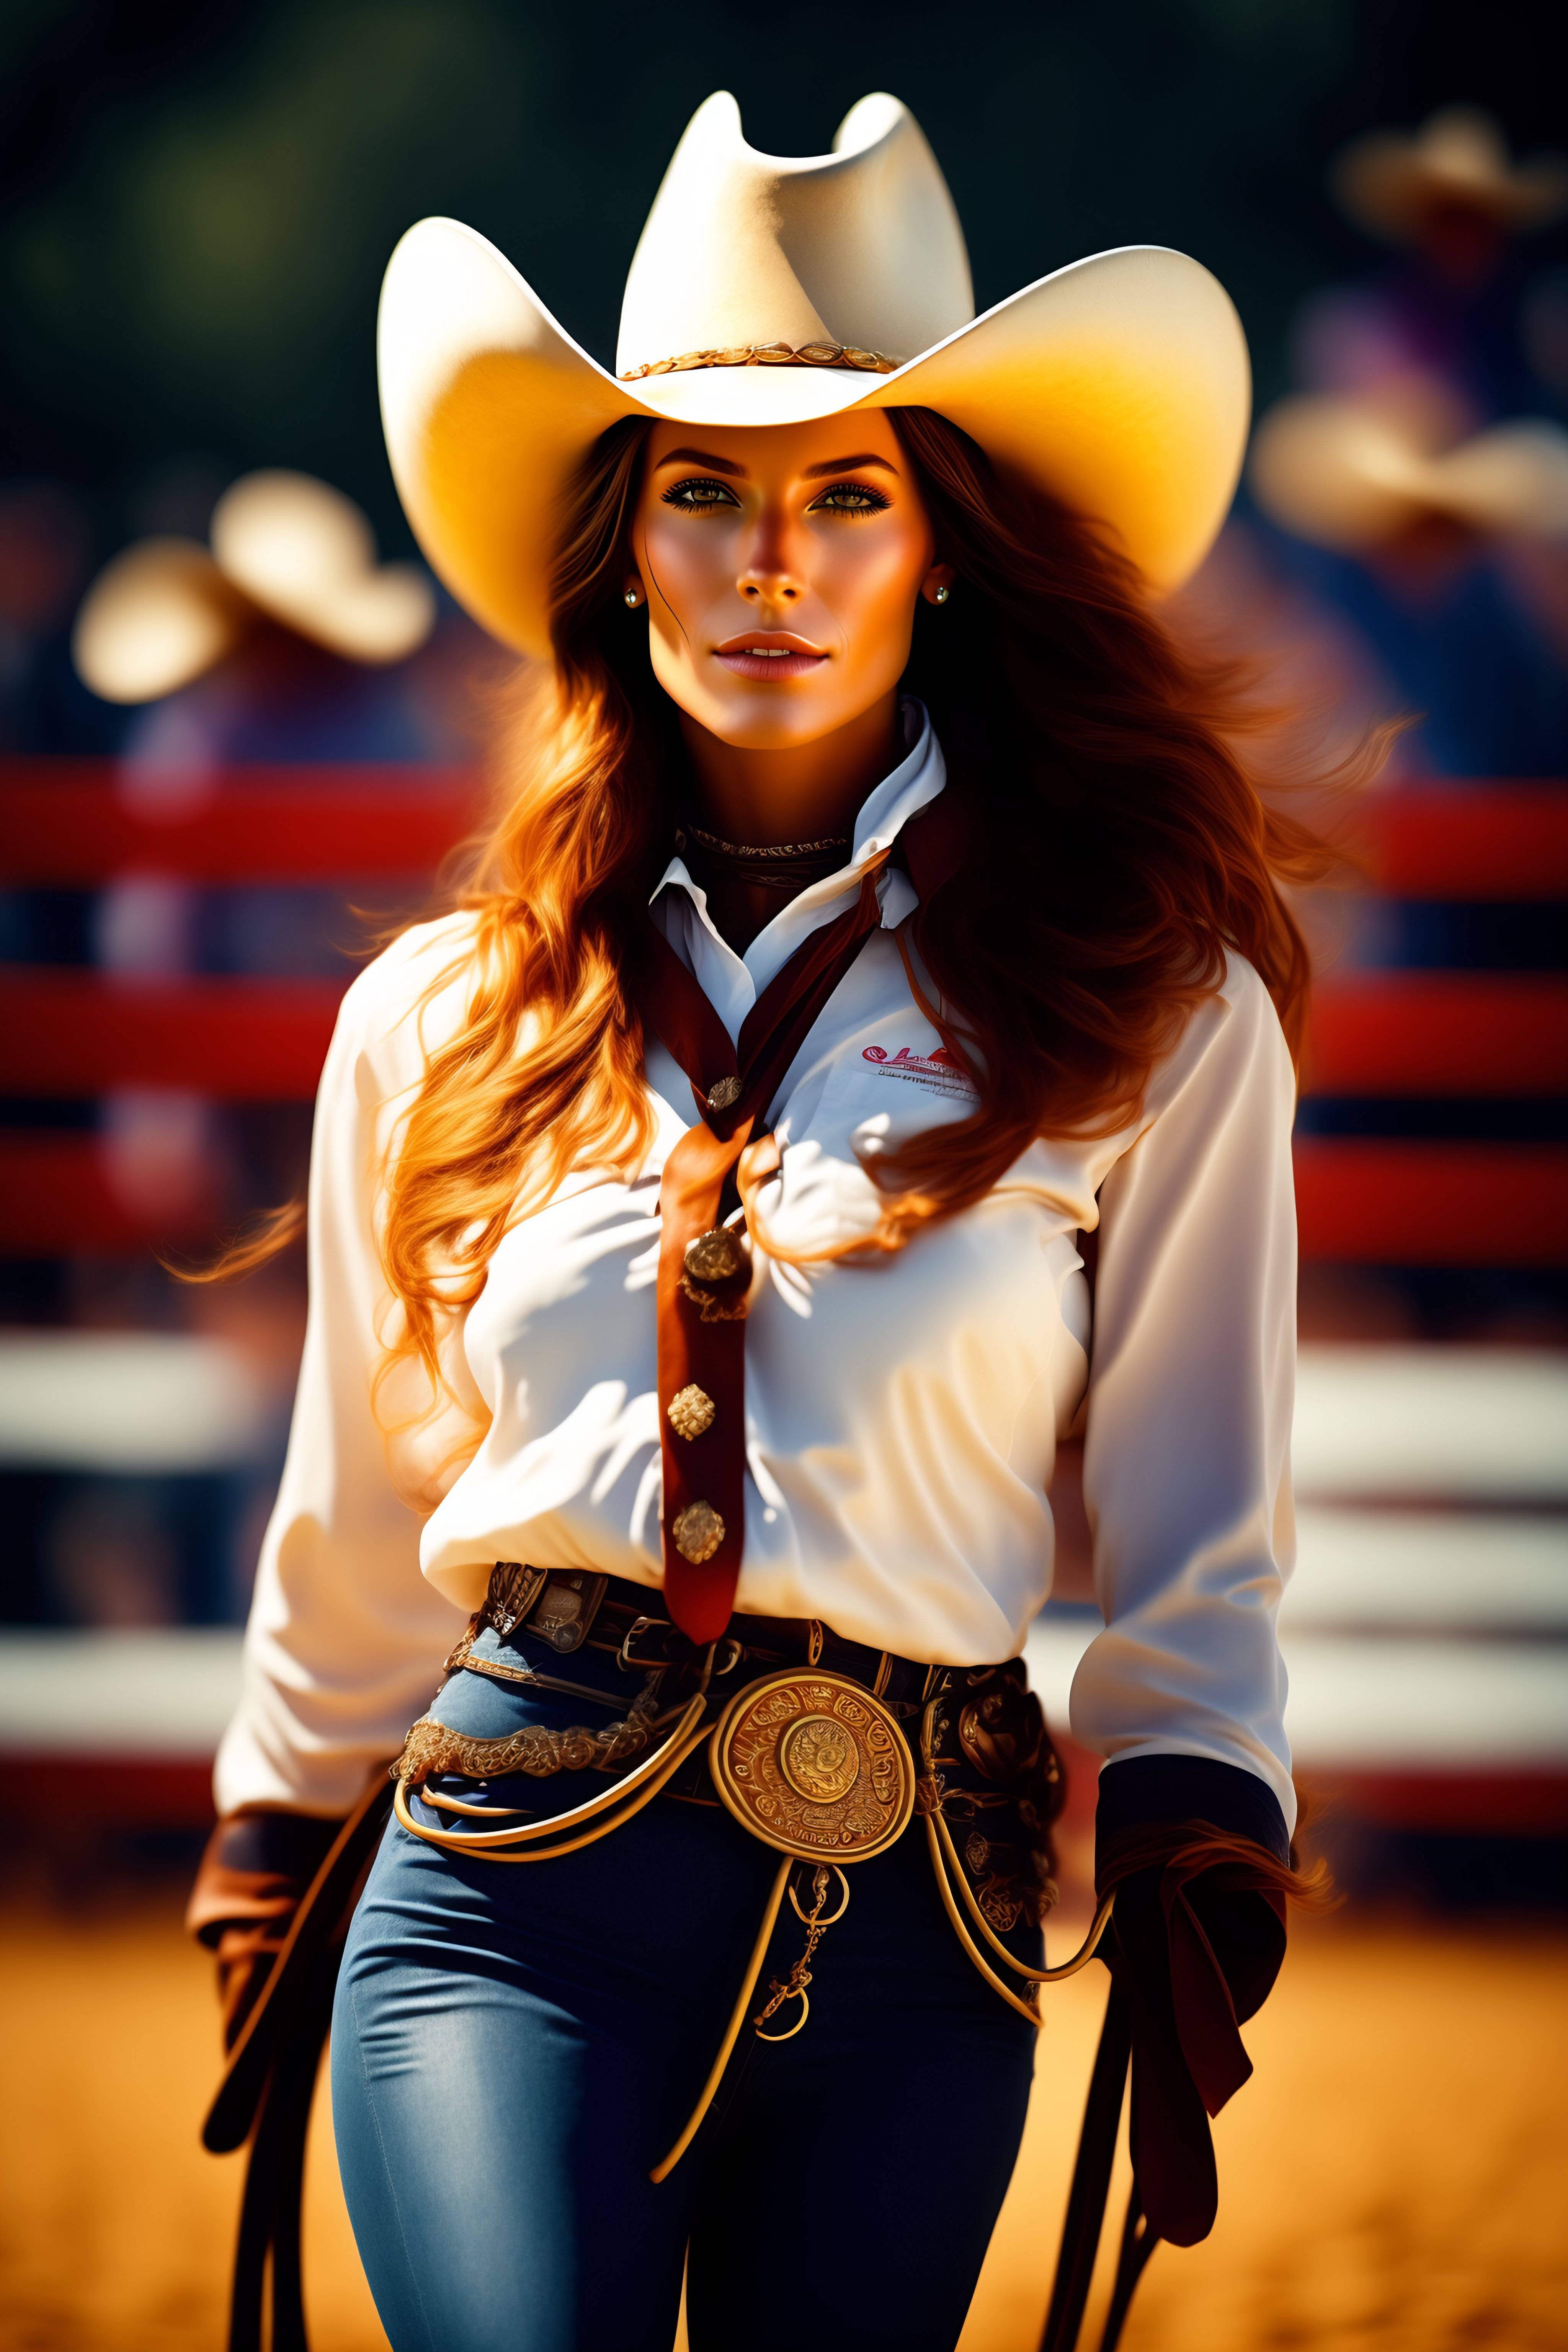 Lexica Realistic Rodeo Girl Cowgirl Beautiful Whole Image